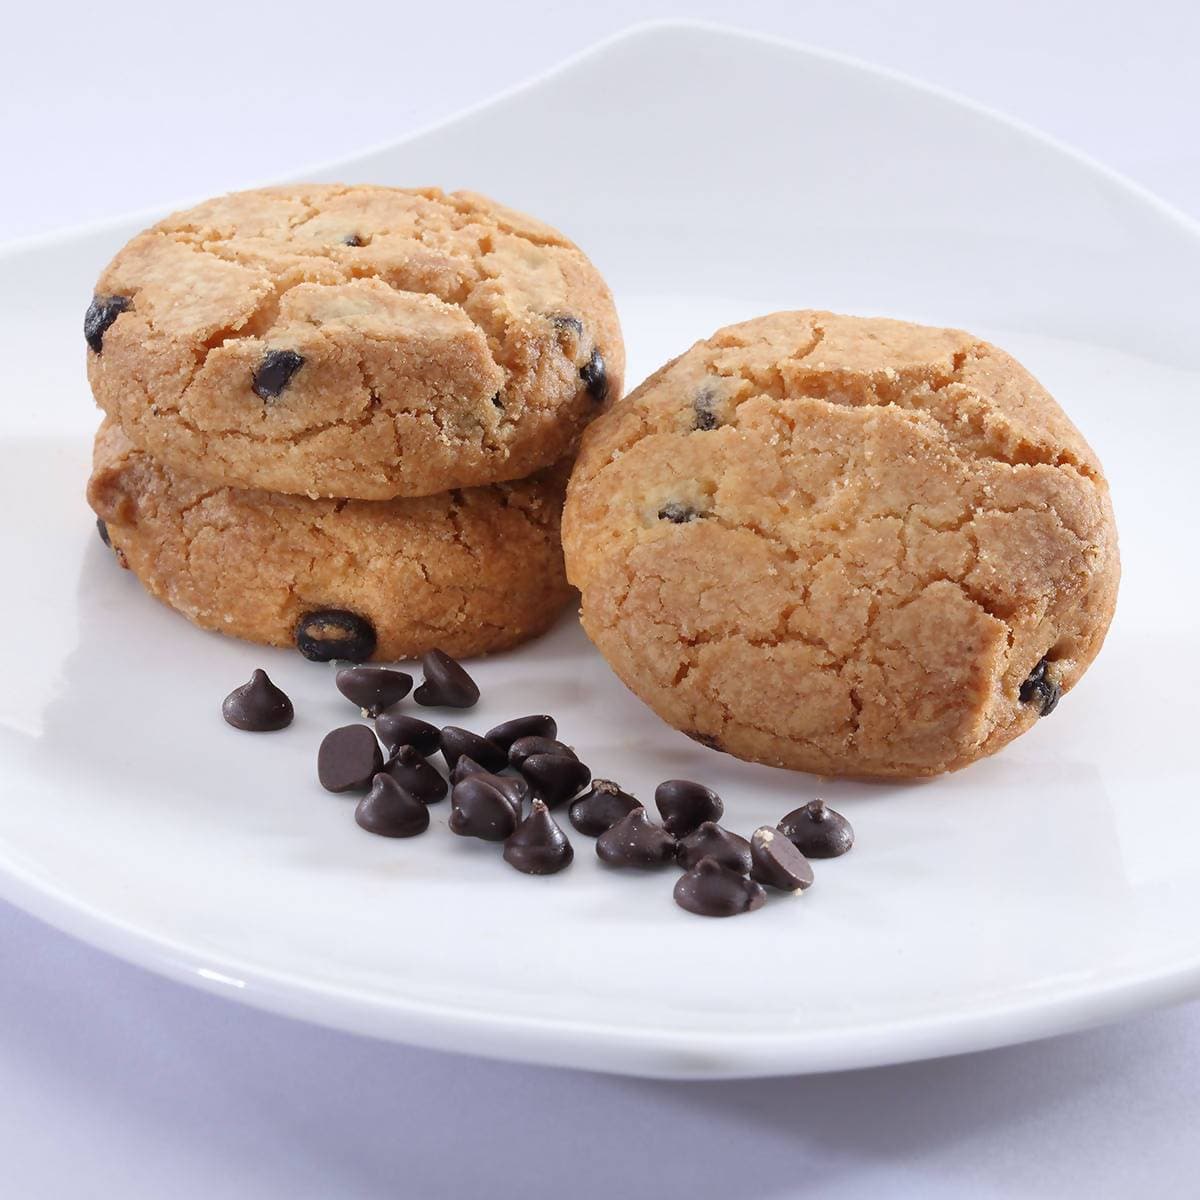 Cafe Niloufer Chocochip Osmania Biscuits